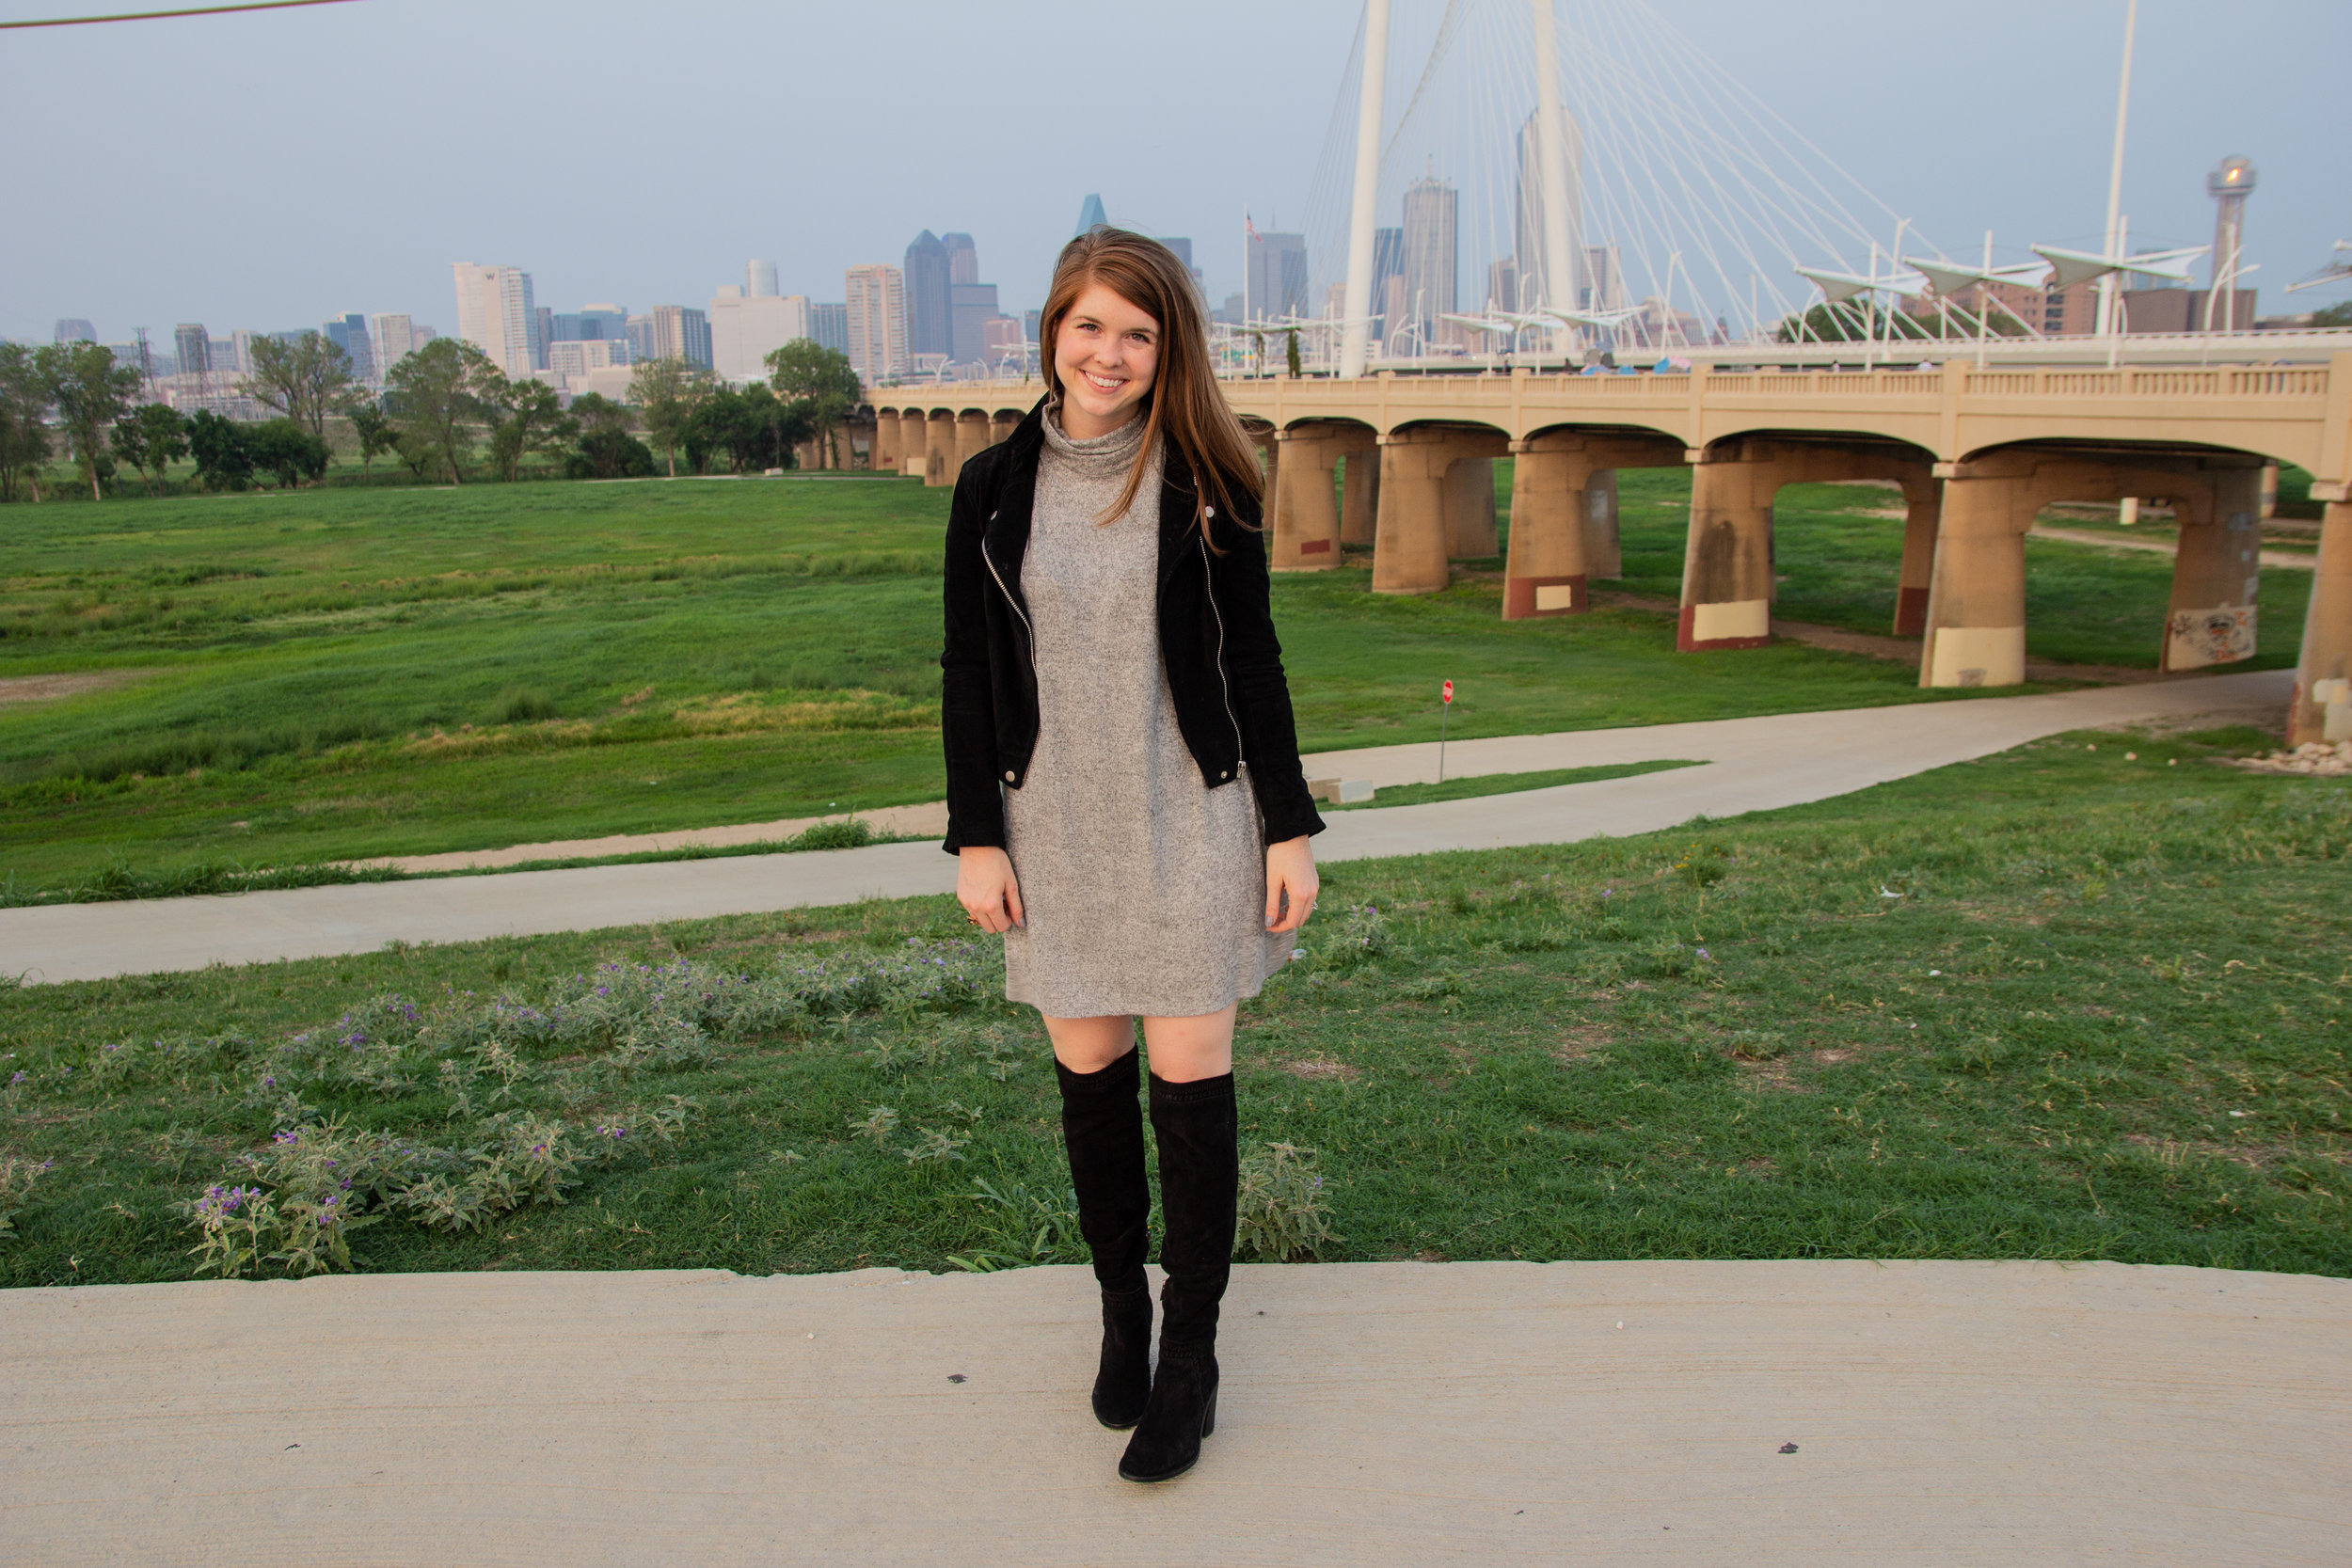 the art of versatility, easy chic, lments of style, ellespann, fall style, fall outfit inspo, aerie plush turtleneck dress, blanknyc suede moto jacket, black suede over the knee boots, dallas blogger